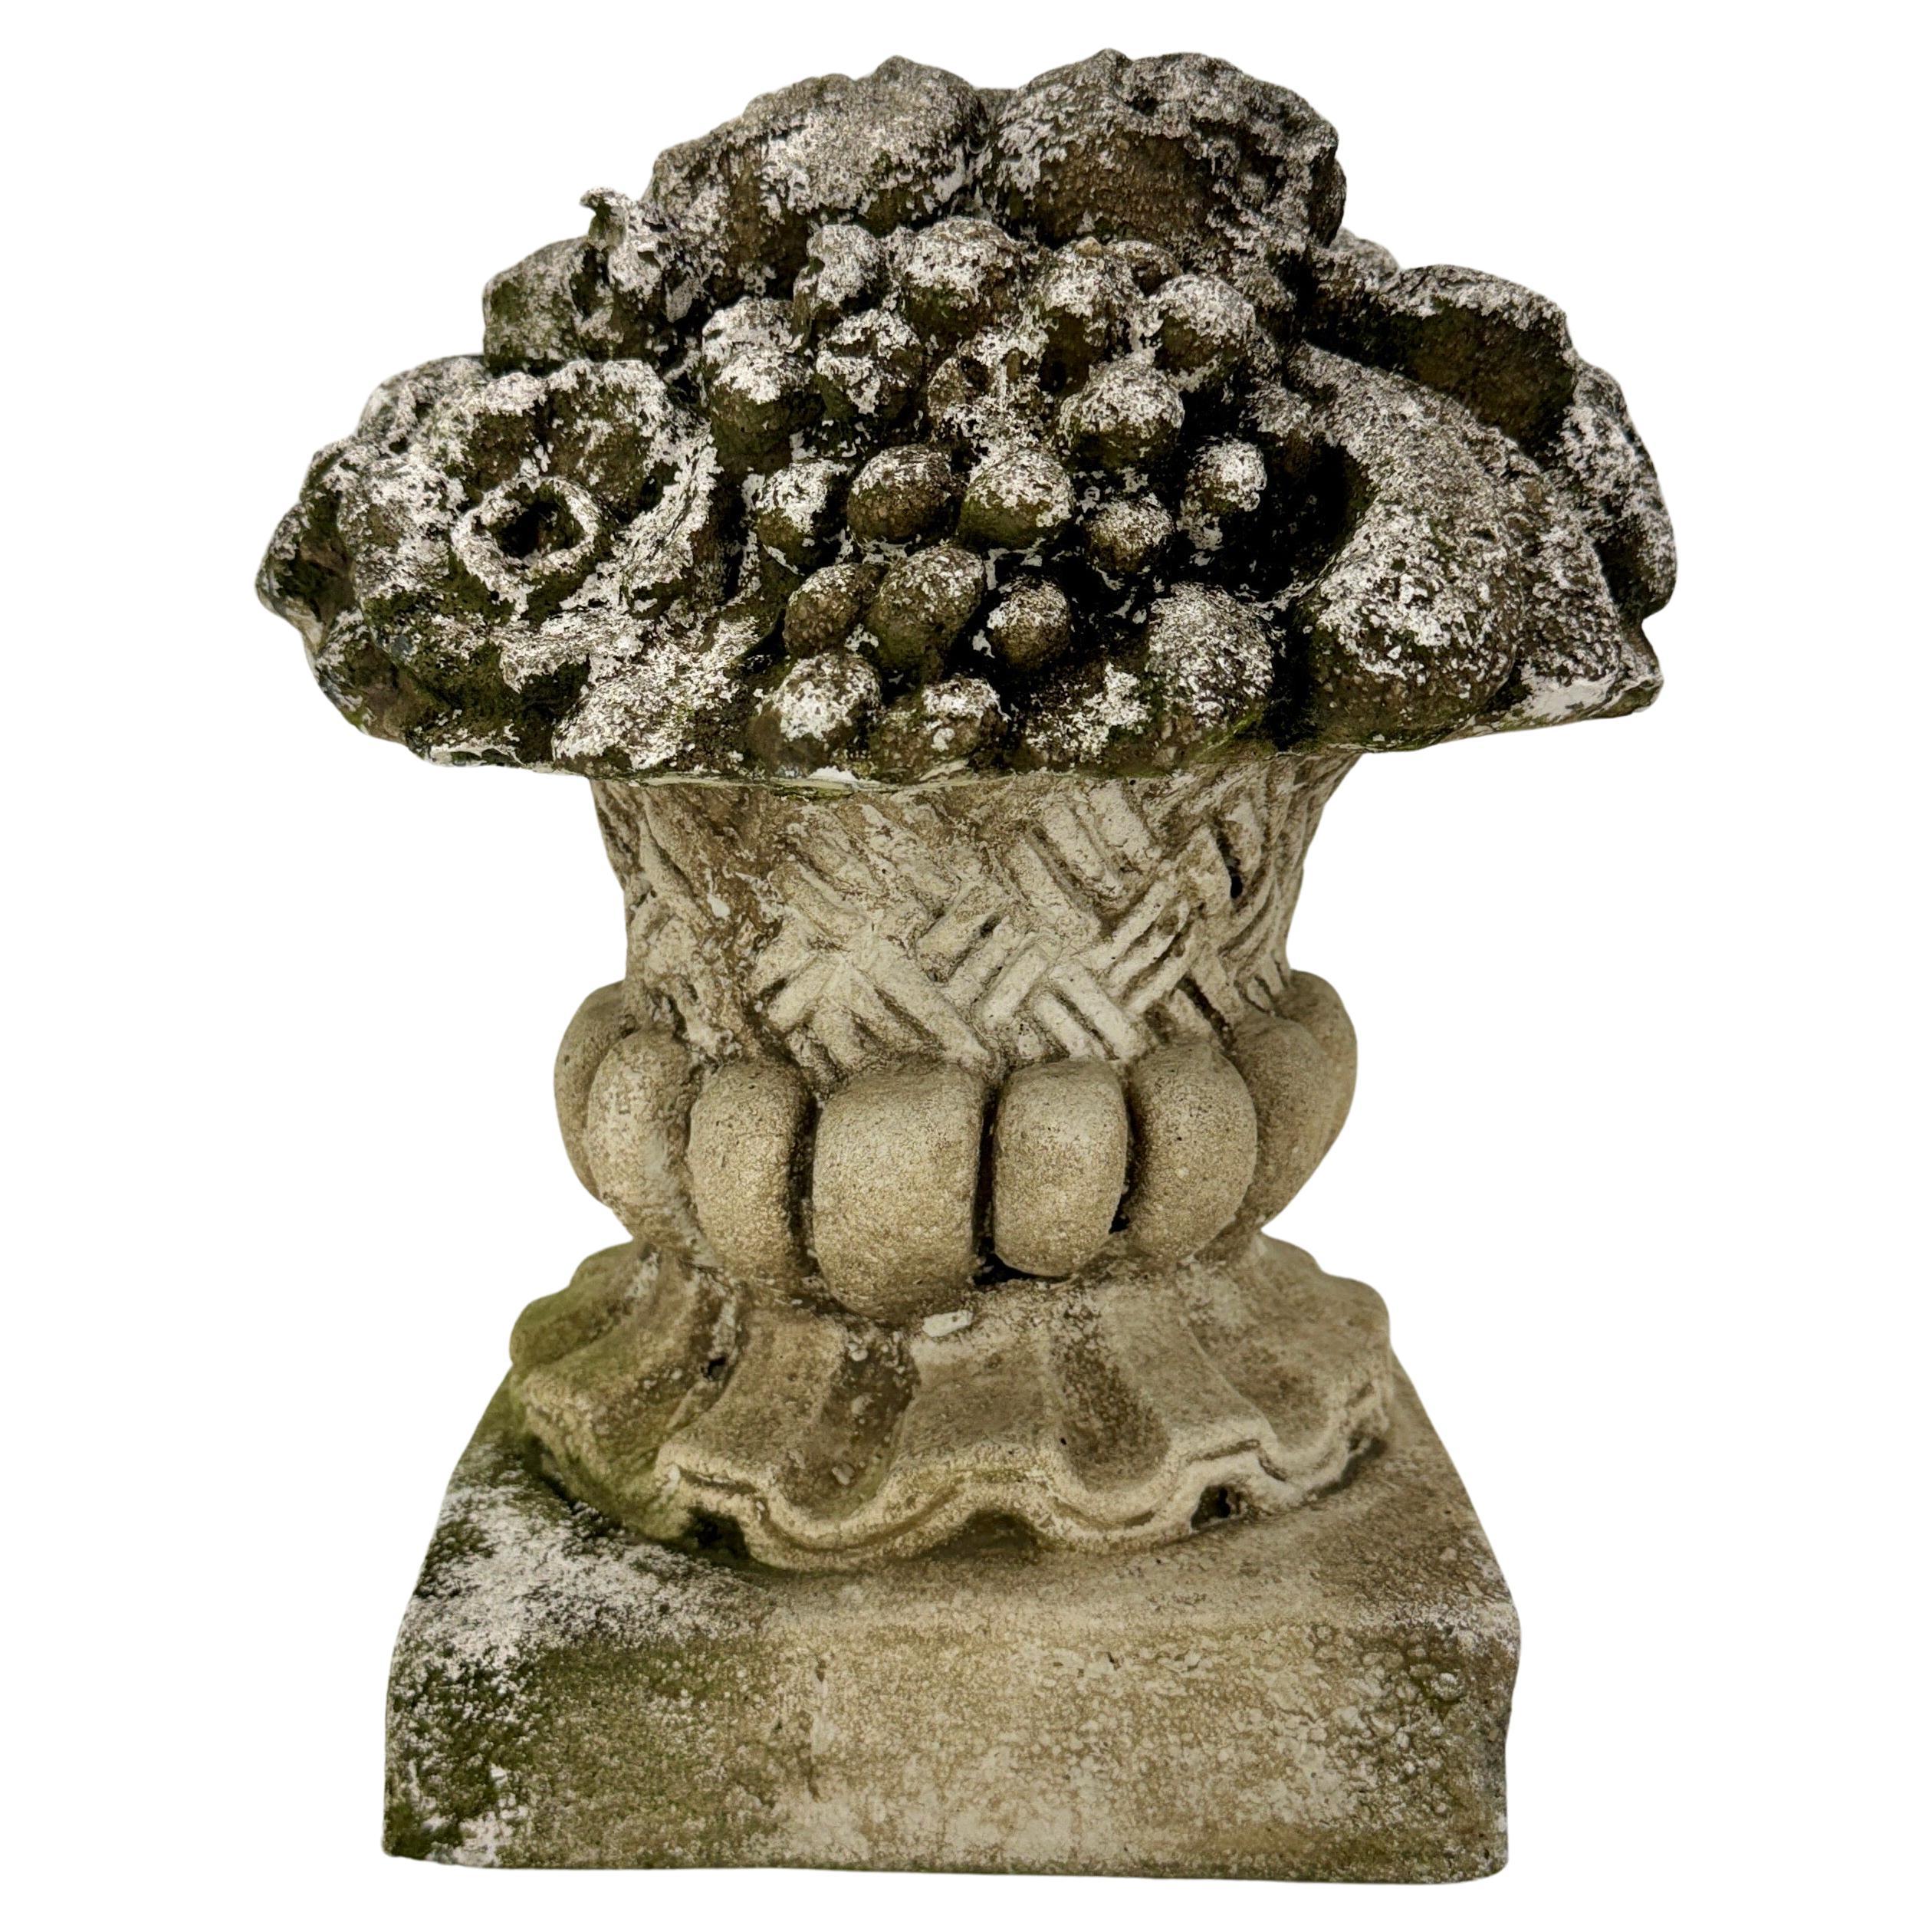 Charming Vintage Garden Topiary with Flowers, 1960's France 

Beautifully aged flower sculpture from the 1960’s. Perfect piece for indoor or outdoor. Certainly, would make a fantastic centerpiece on a console or dining table as well as coffee or